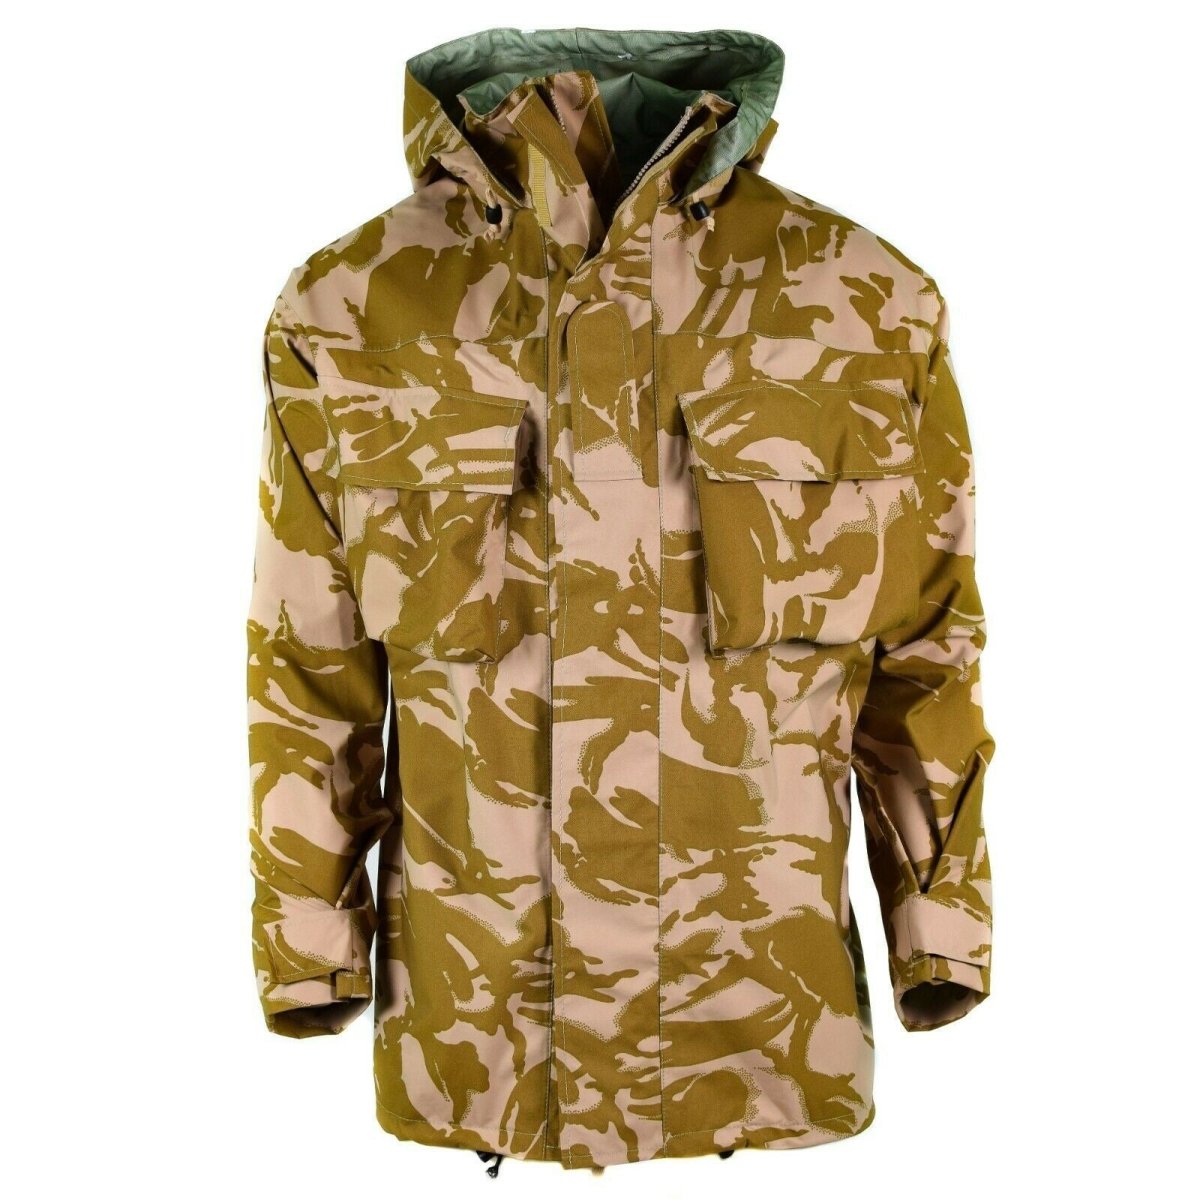 British Army Gore-Tex Jacket - Forces Uniform and Kit